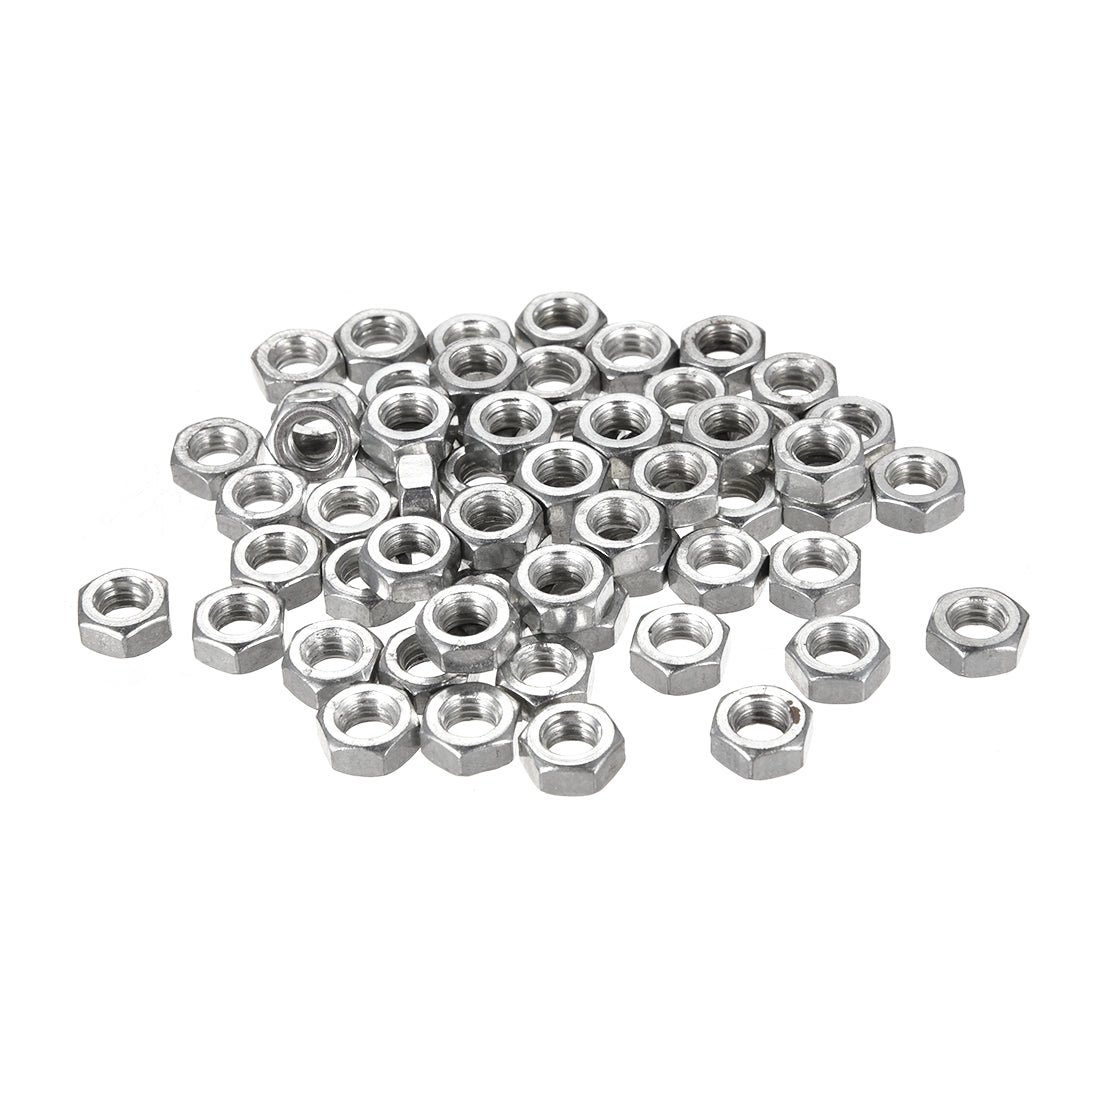 uxcell Uxcell M6 Metric Carbon Steel Hexagon Hex Nut Silver Tone 60pcs